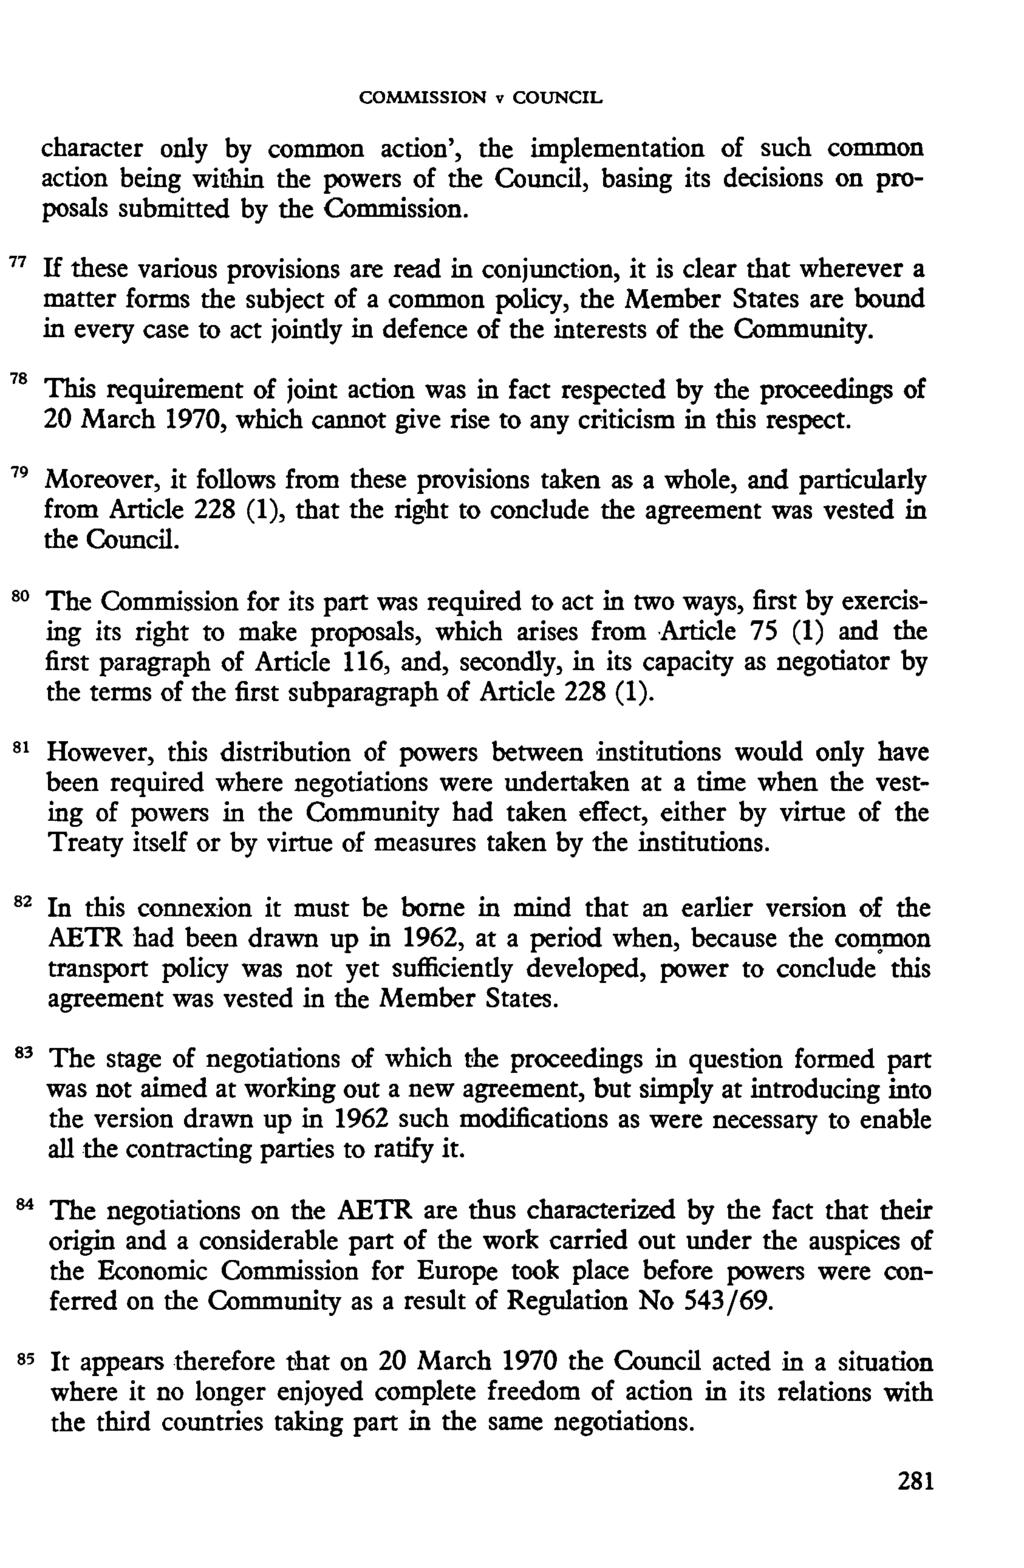 COMMISSION v COUNCIL character only by common action', the implementation of such common action being within the powers of the Council, basing its decisions on proposals submitted by the Commission.